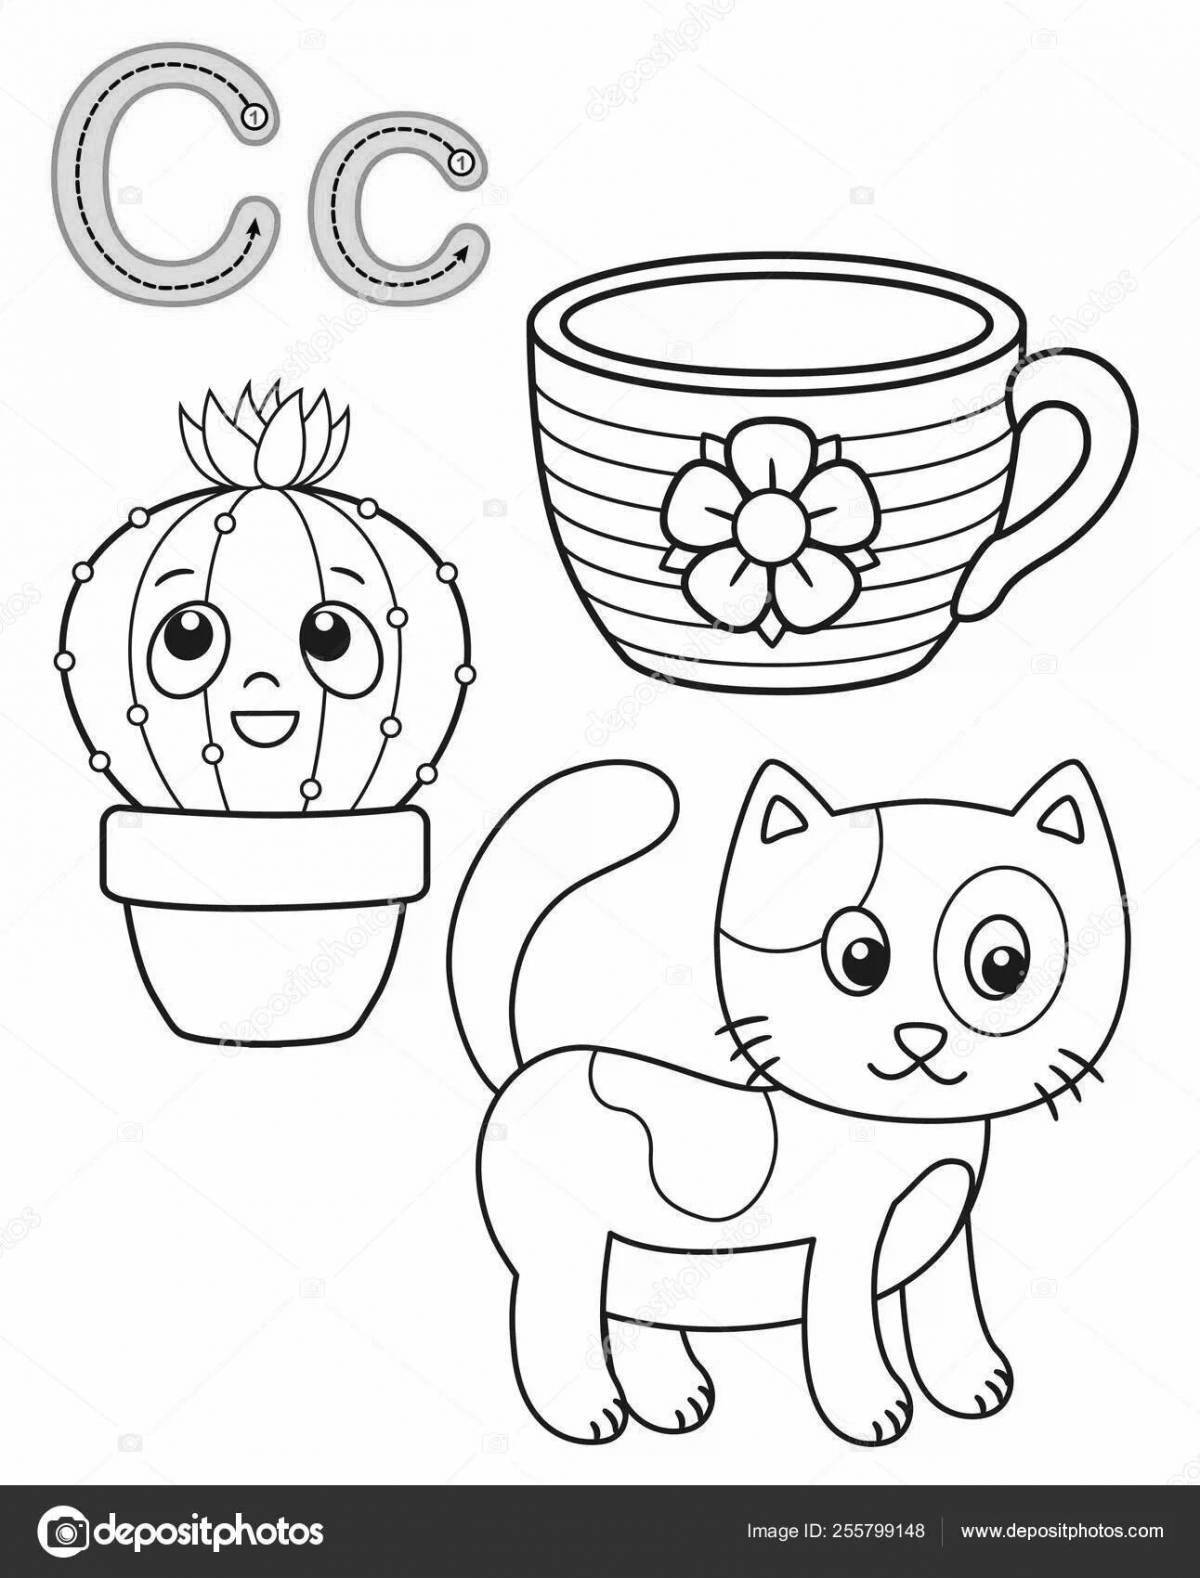 Coloring live cat in a cup